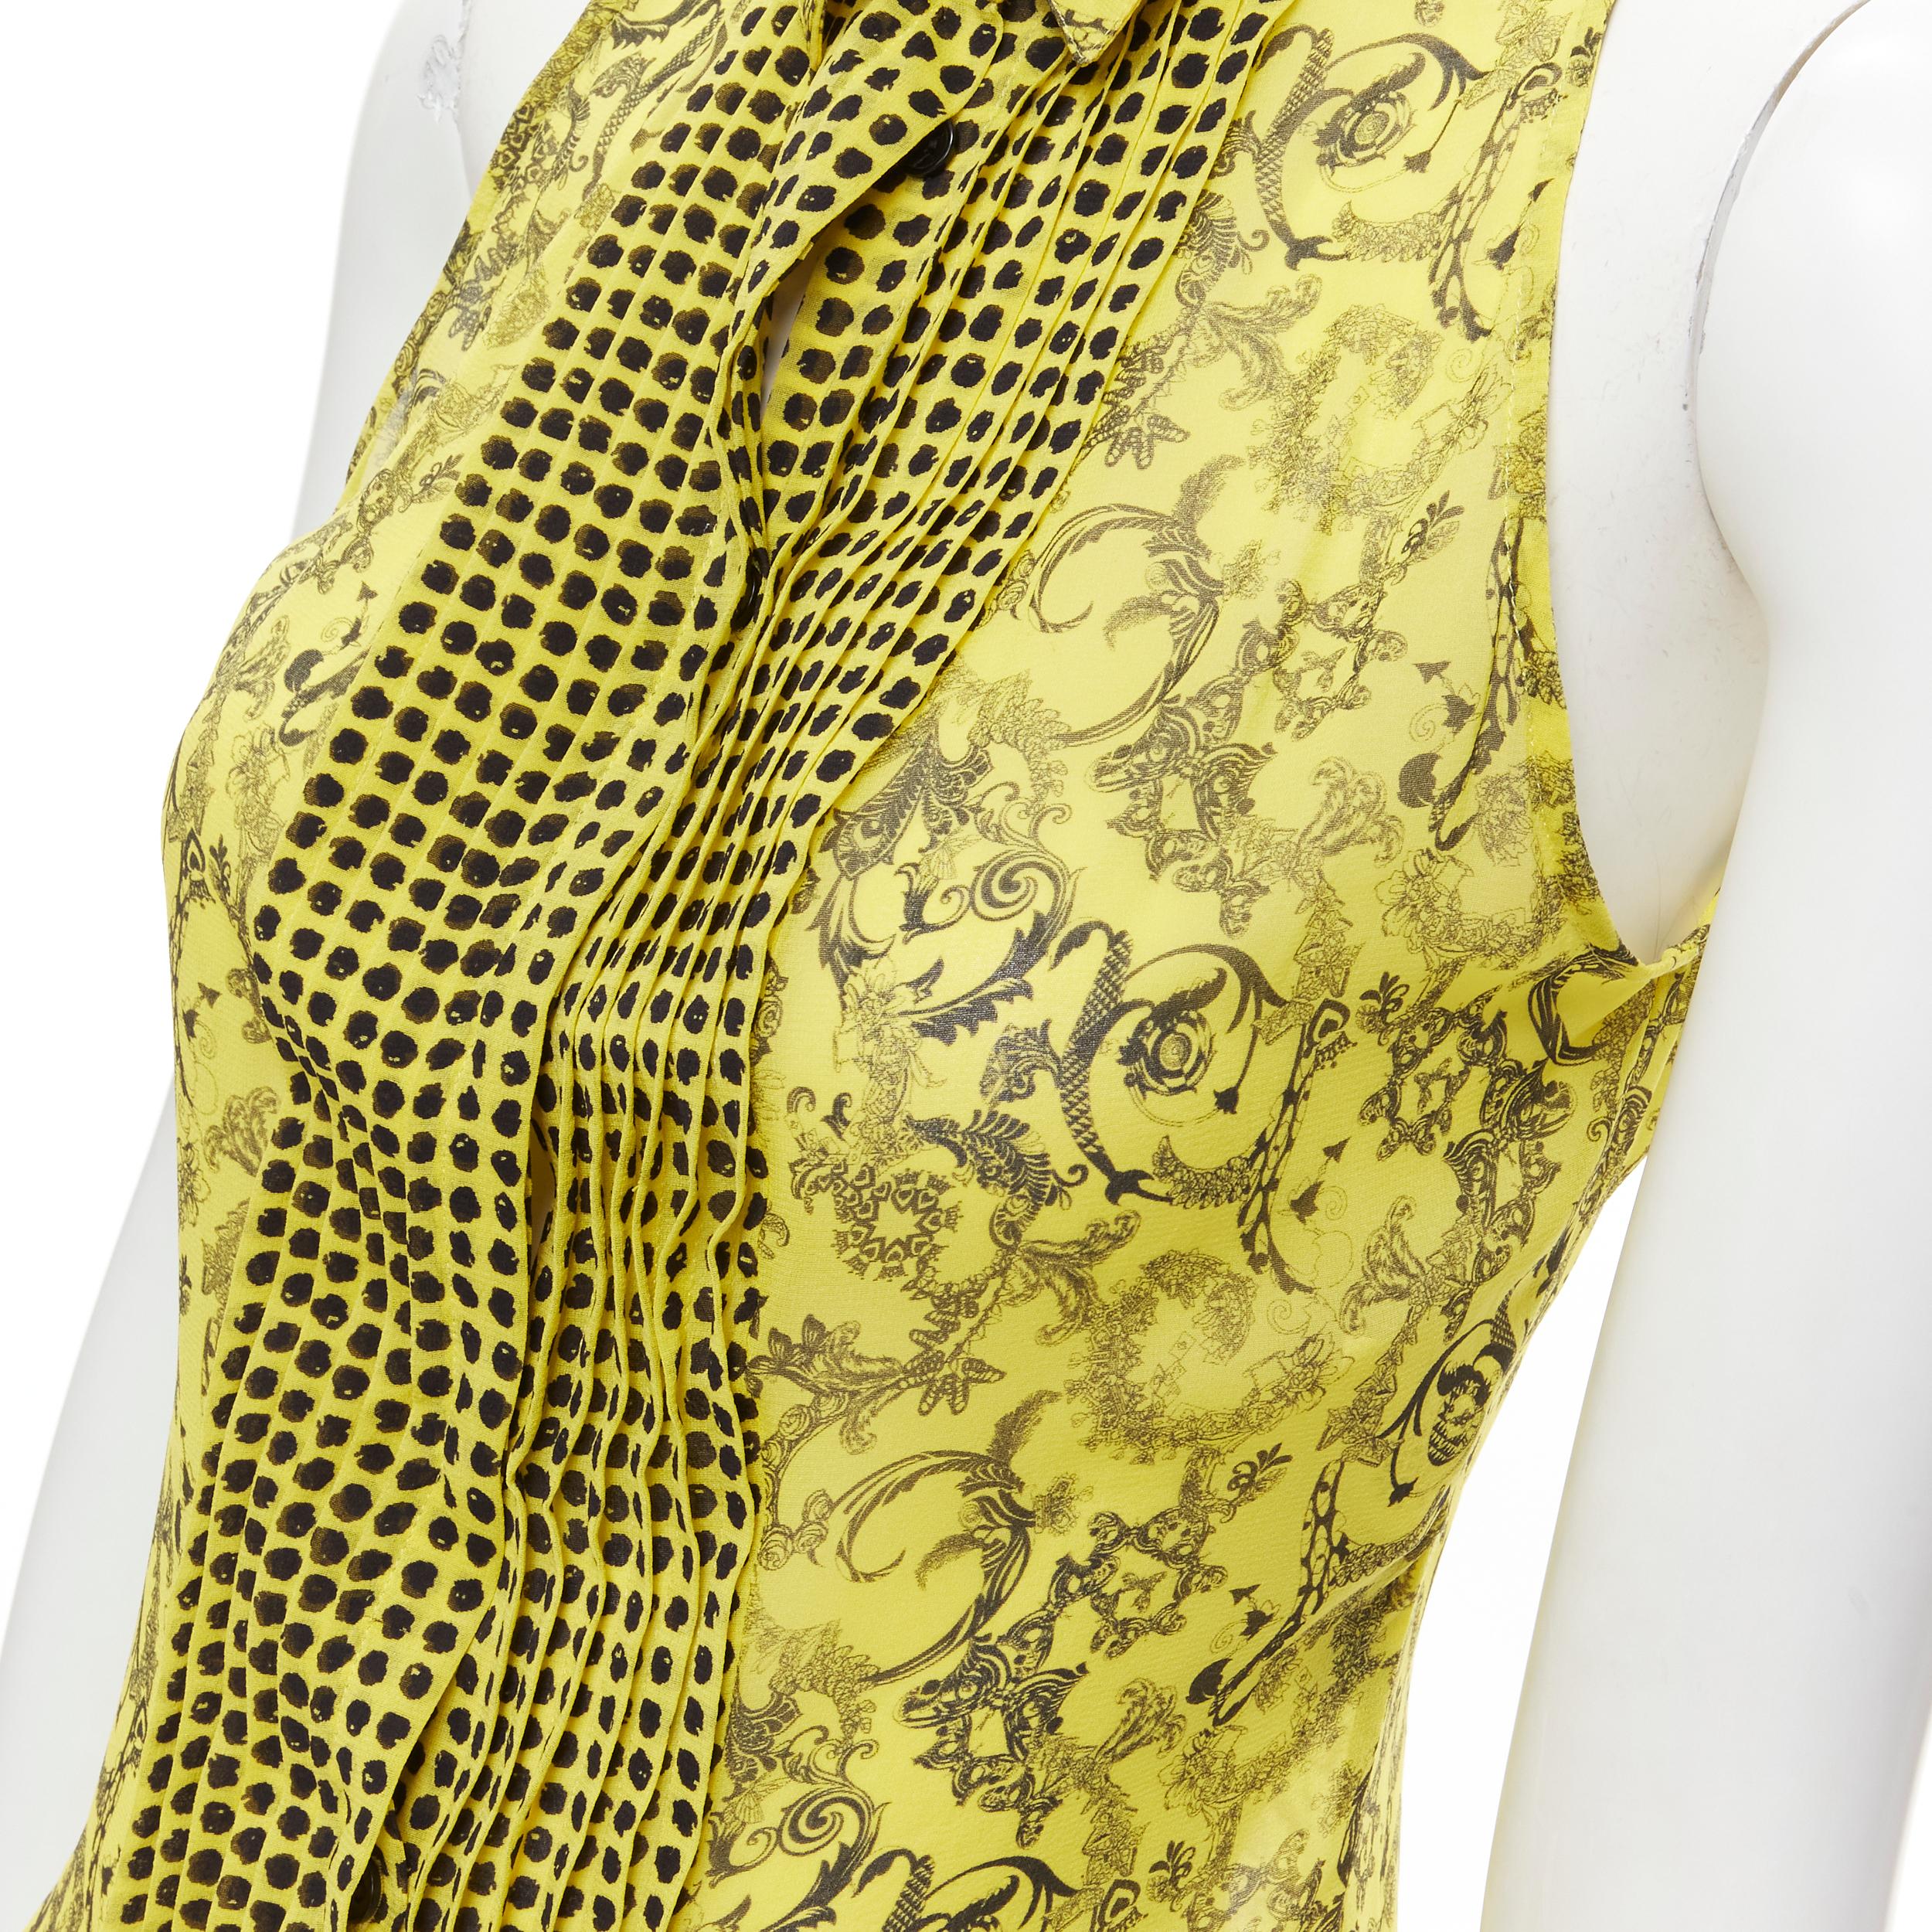 VERSACE yellow silk Baroque print polka dot pleated collar sleeveless shirt IT40 S 
Reference: DNCU/A00004 
Brand: Versace 
Material: Silk 
Color: Yellow 
Pattern: Baroque 
Closure: Button 
Made in: Italy 

CONDITION: 
Condition: Excellent, this